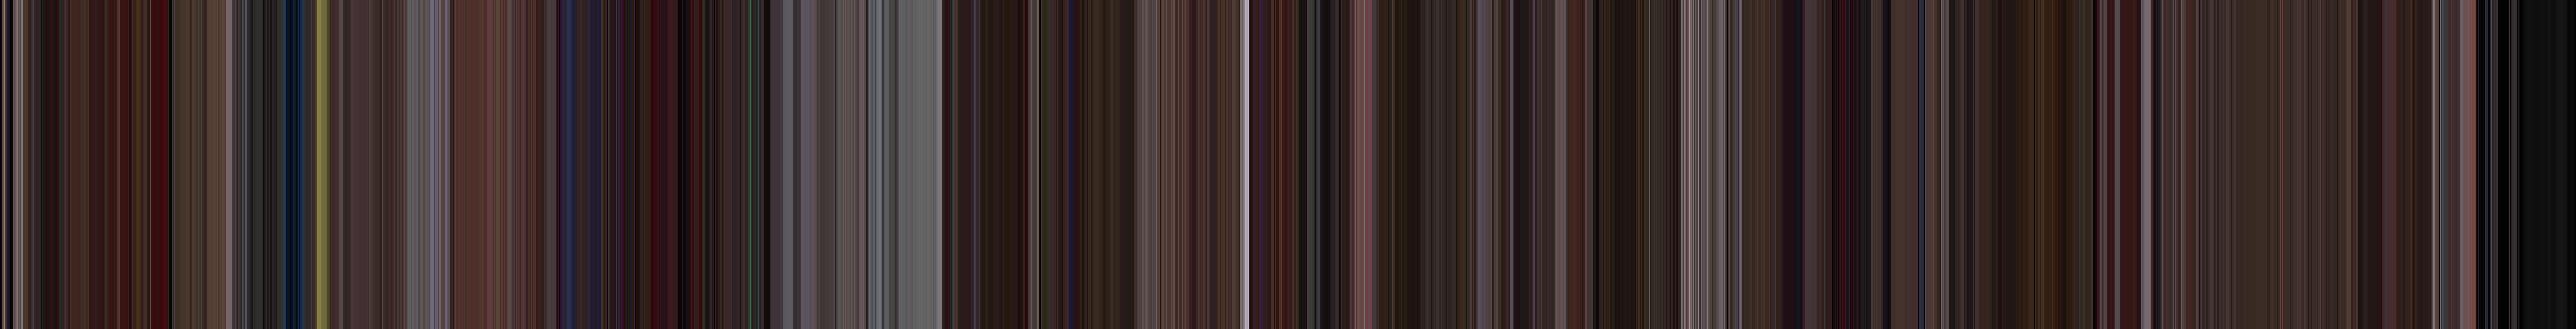 Trainspotting barcode beretich.png